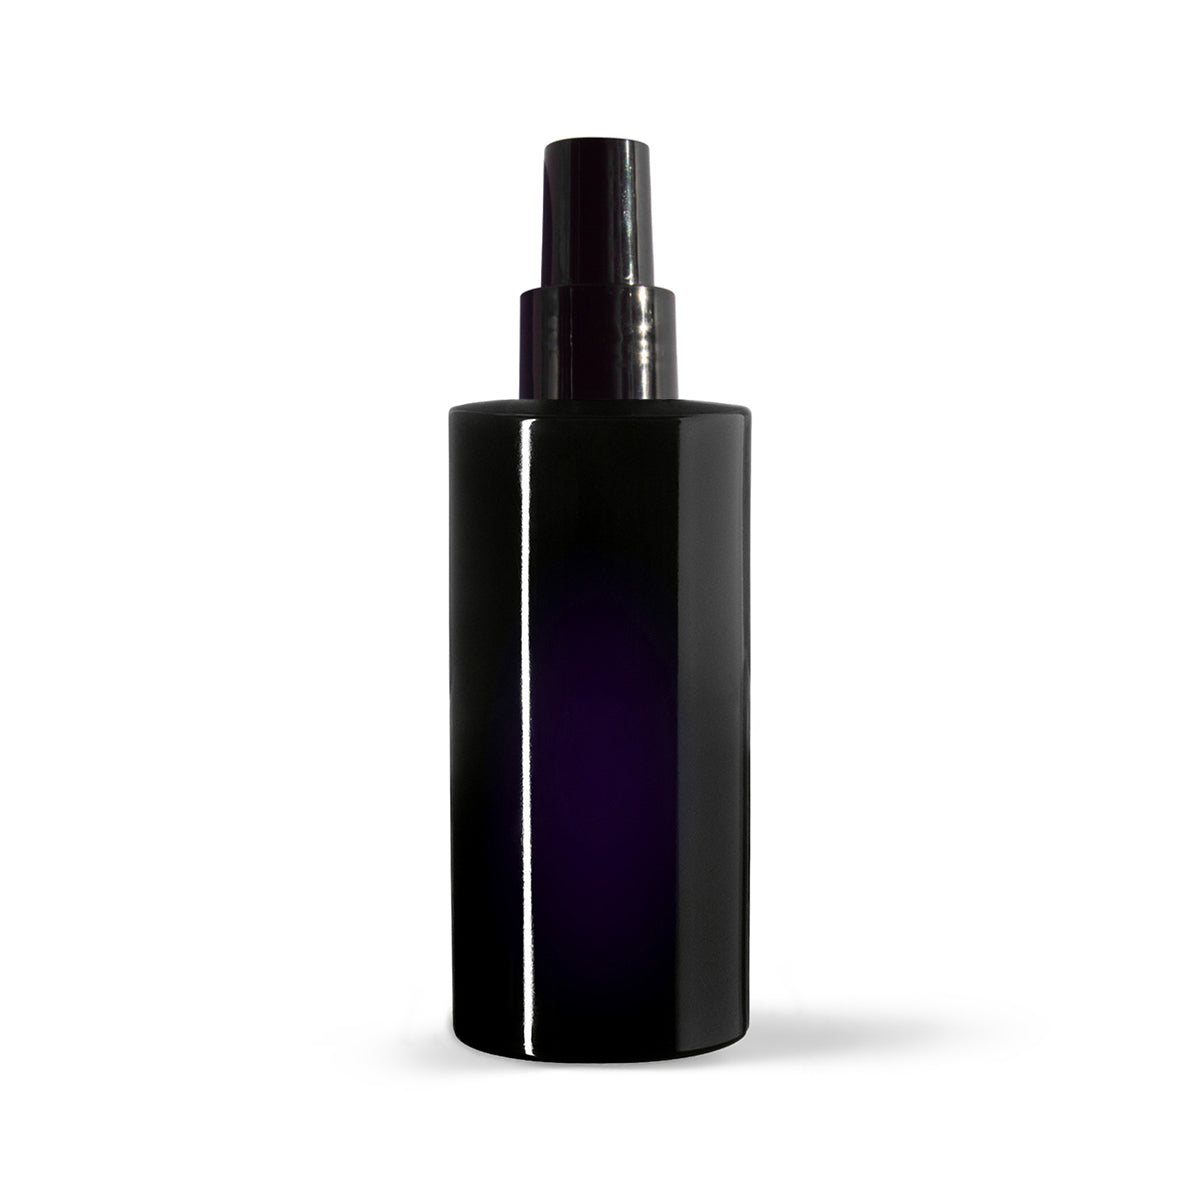 BOTTLE, VIOLET GLASS 100ML WITH SPRAY